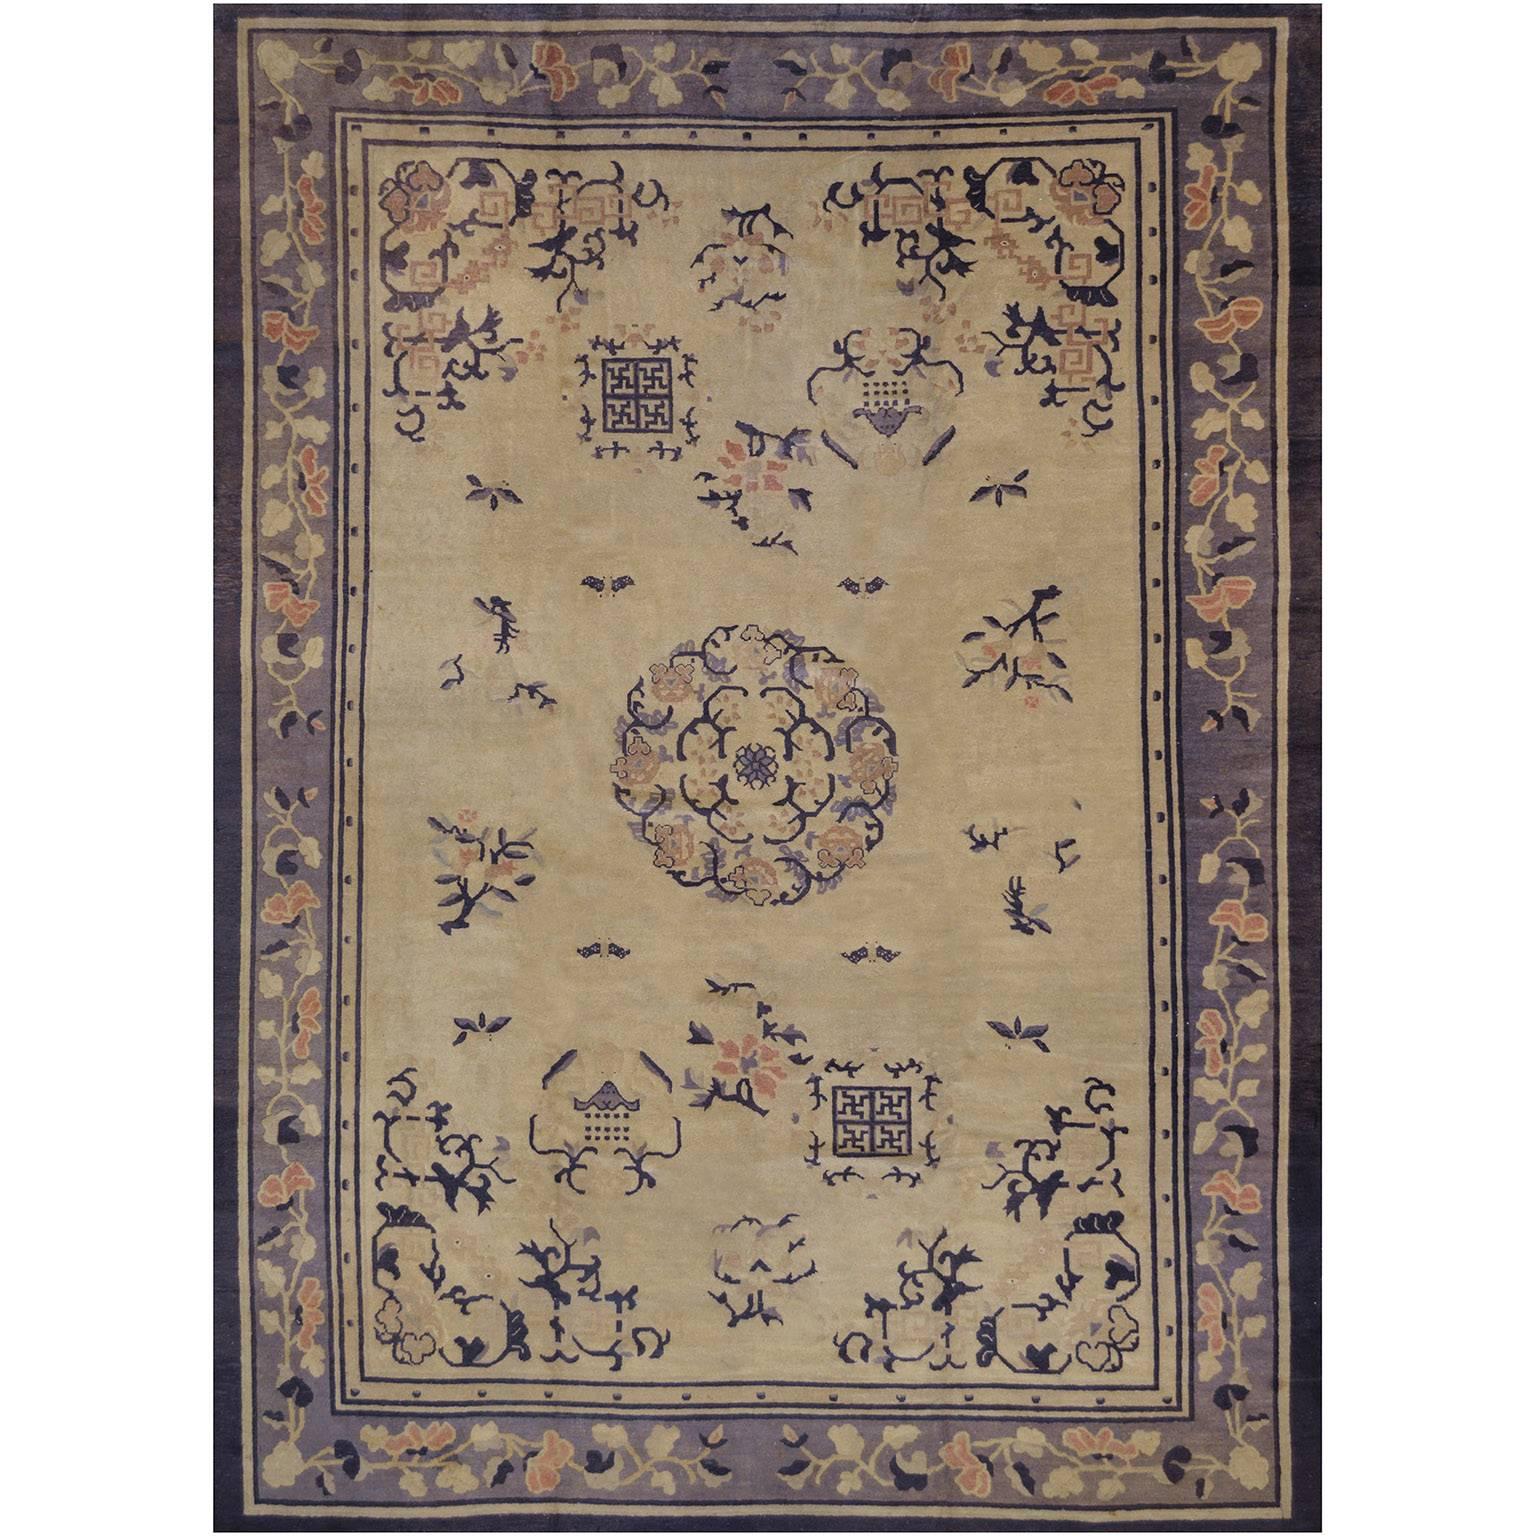 Early 20th Century Chinese Rug